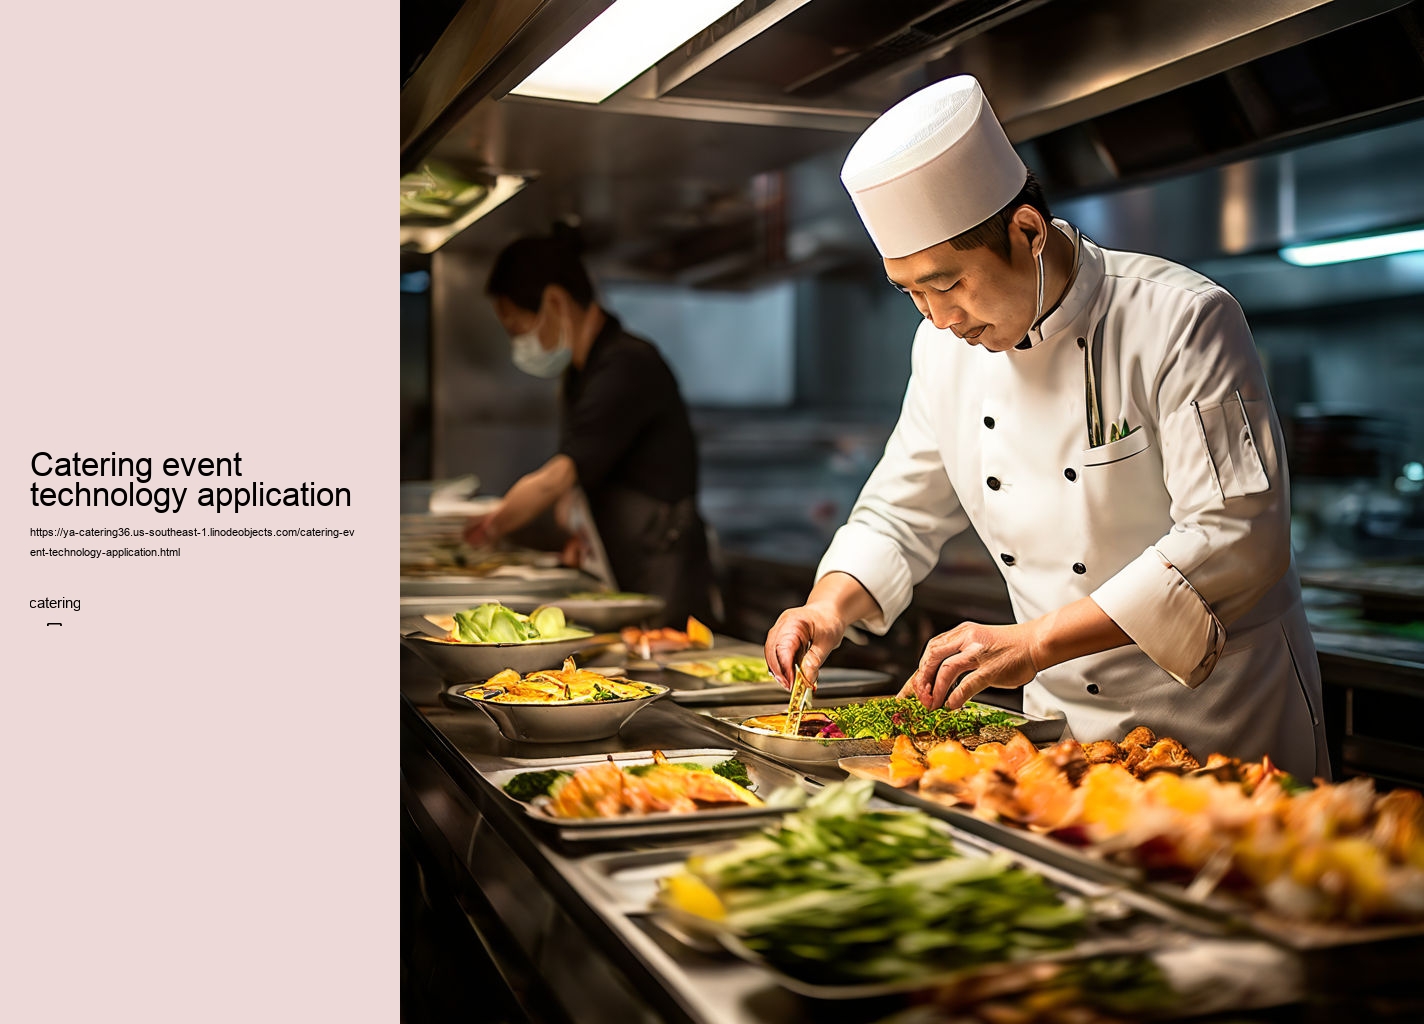 Catering event technology application